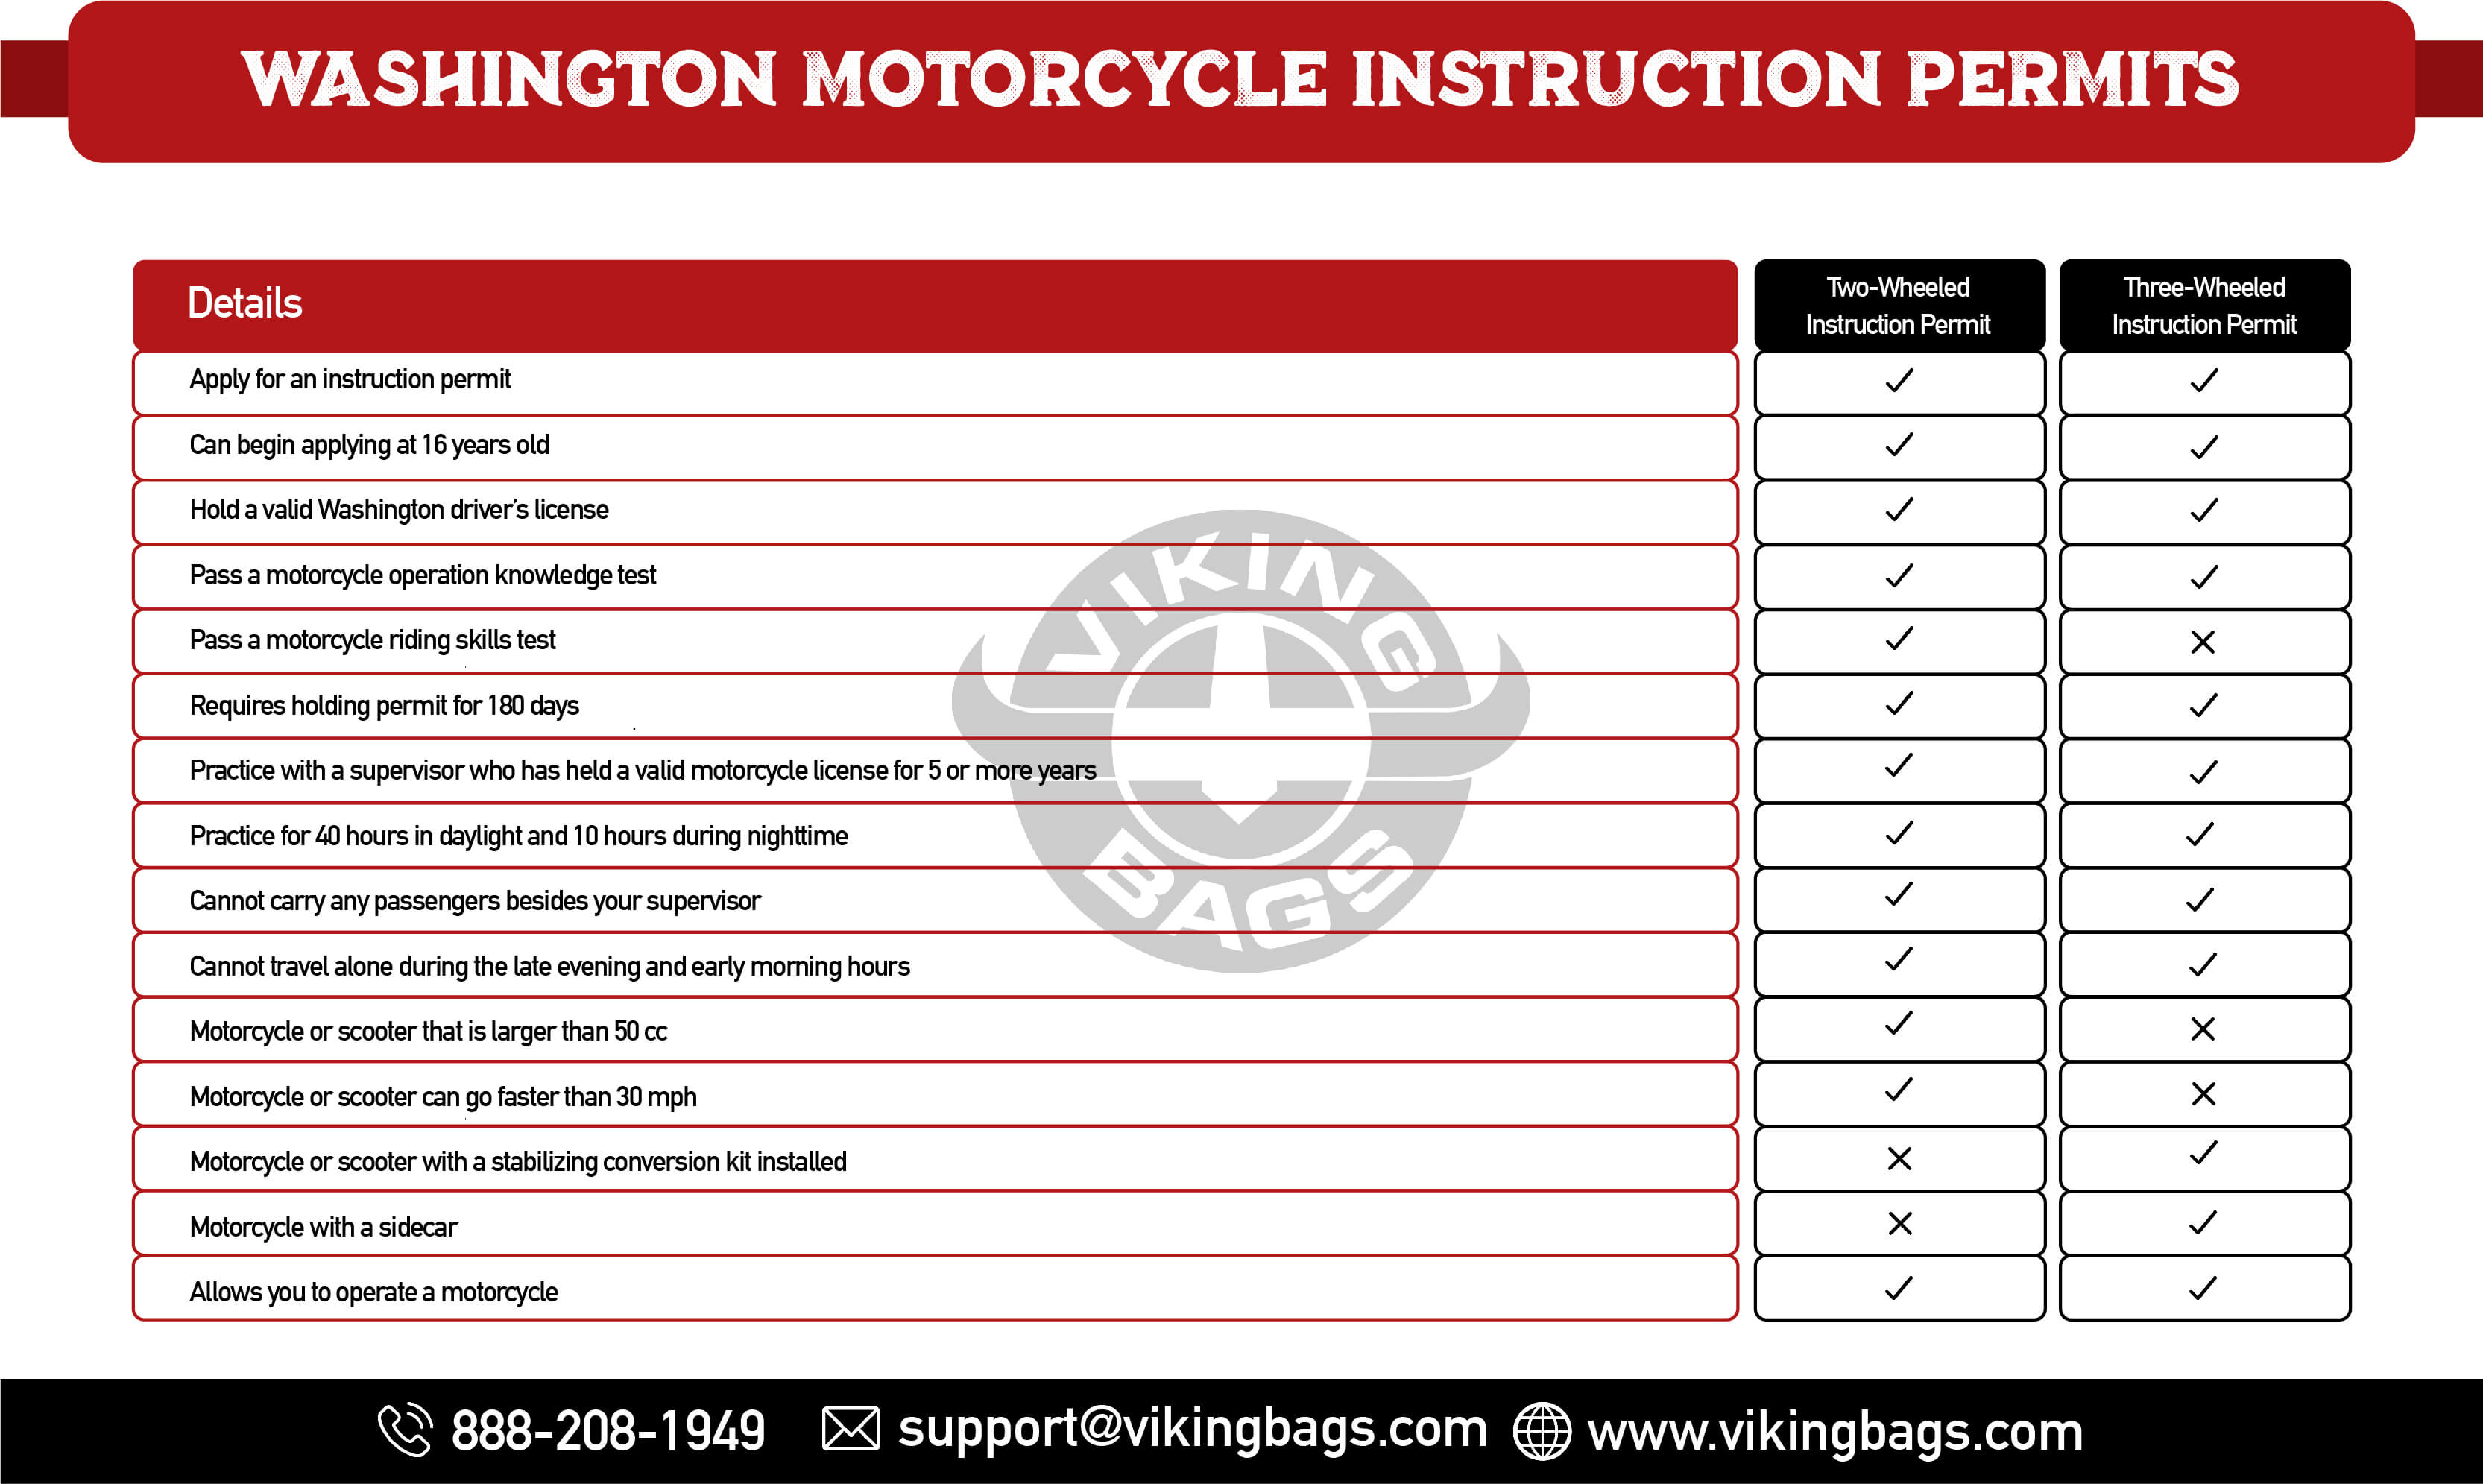 Requirements for Washington Motorcycle Instruction Permits